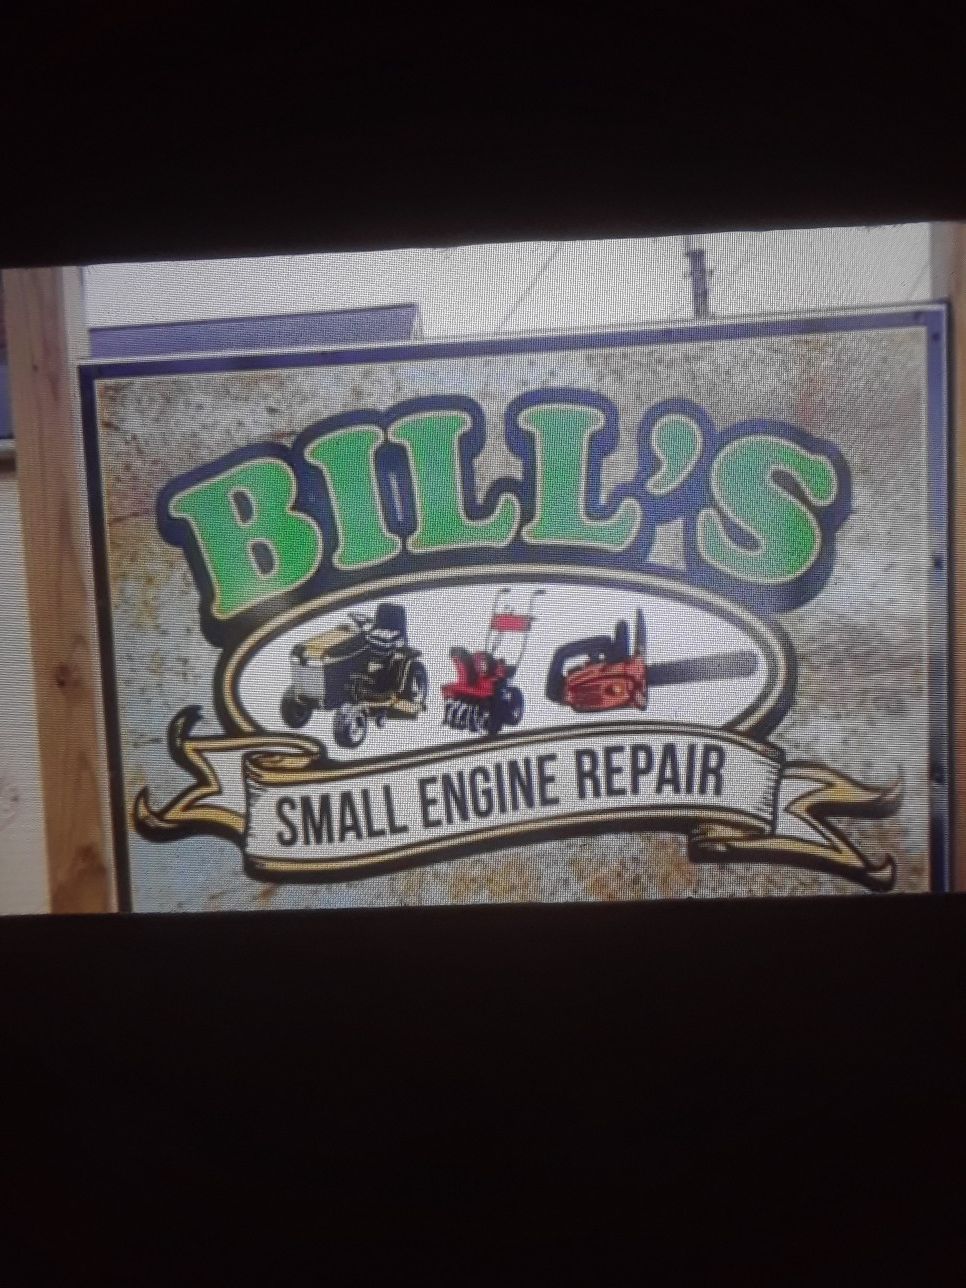 This is bill I work on all types of lawn mowers and more